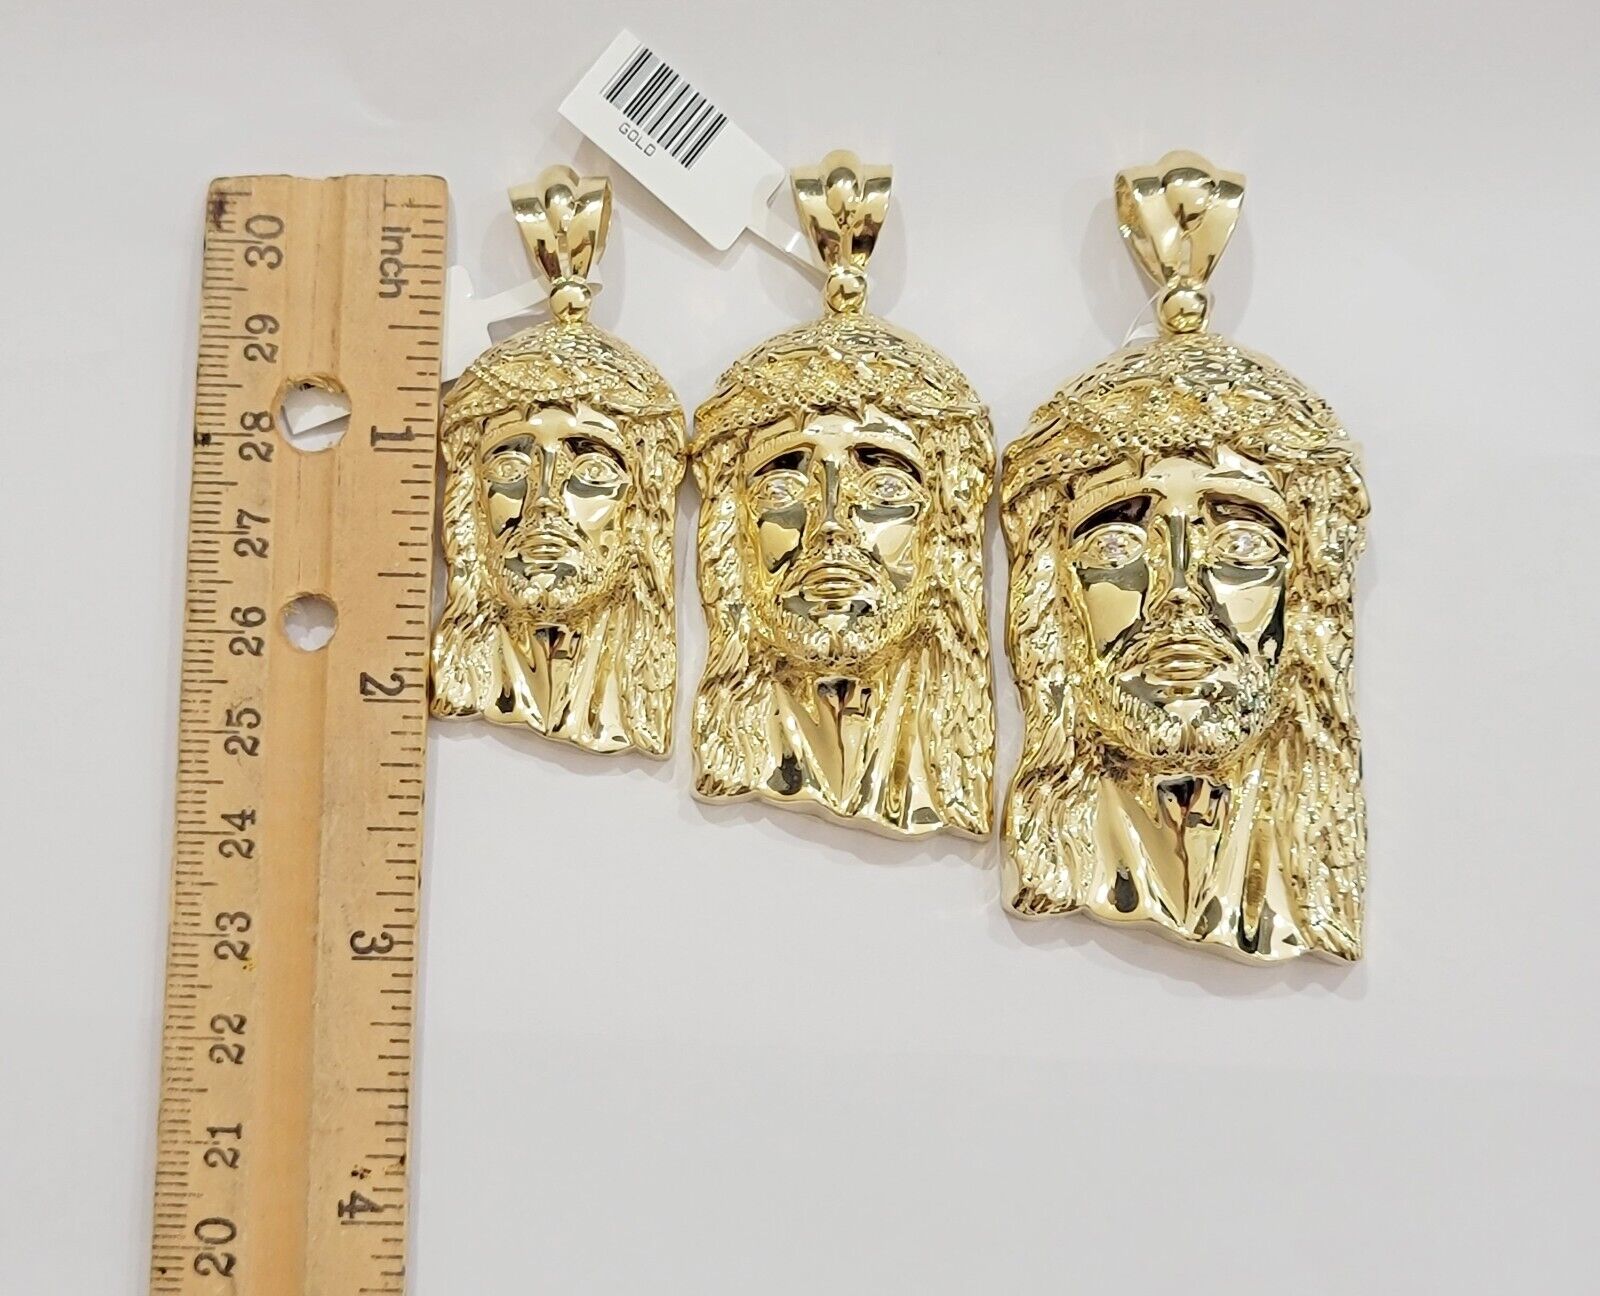 Real 10k Gold Pendant Jesus Head Charm 10kt Yellow Gold 3.1 Inch Long For Men's